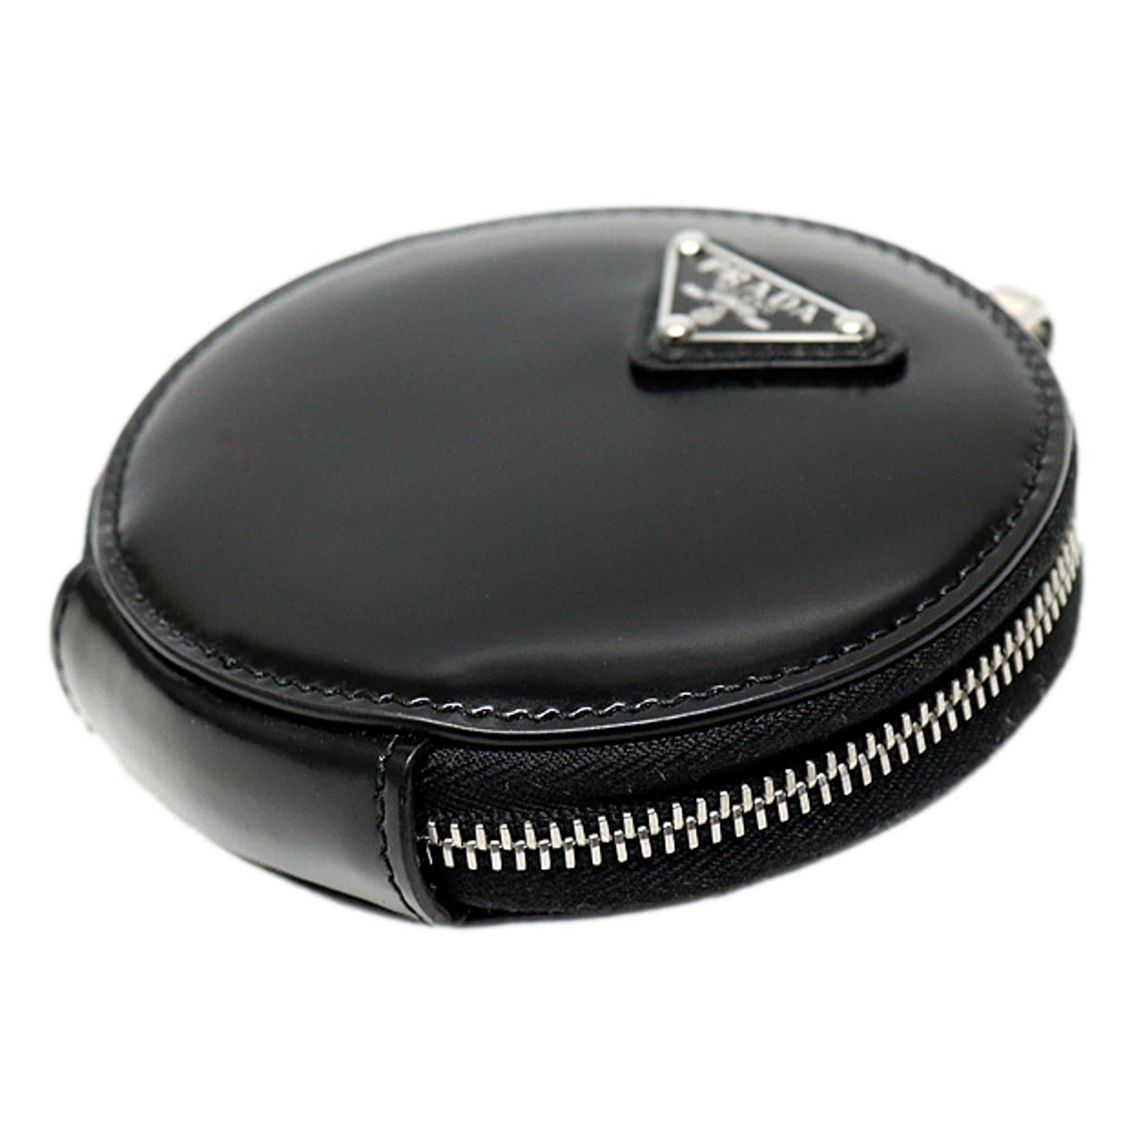 Prada Triangle Plaque Smooth Black Leather Round Mini Pouch Keychain (New) - Image 3 of 5